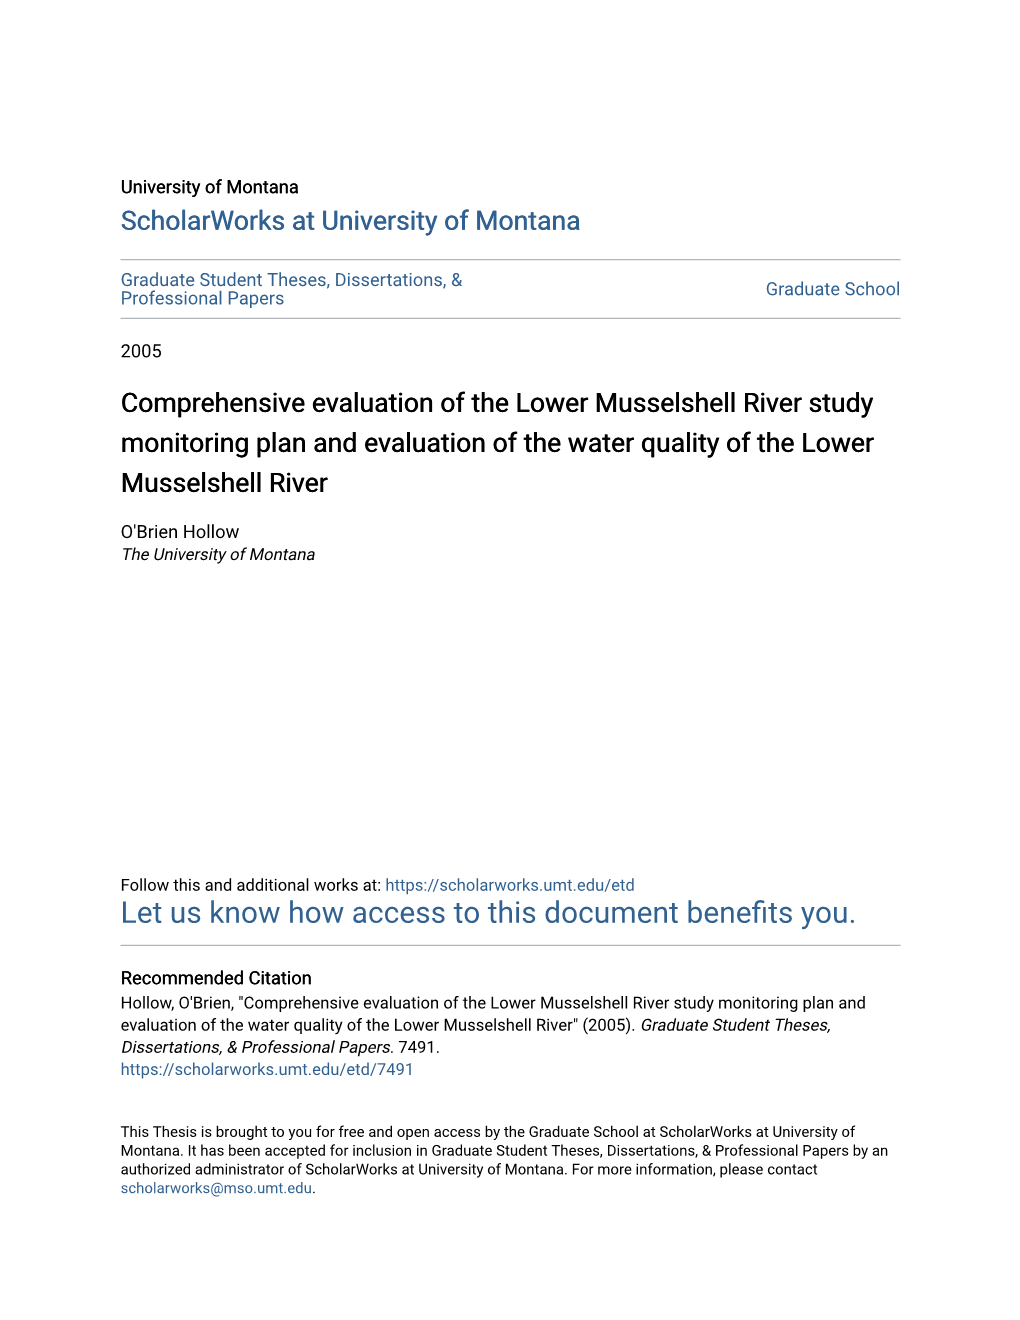 Comprehensive Evaluation of the Lower Musselshell River Study Monitoring Plan and Evaluation of the Water Quality of the Lower Musselshell River